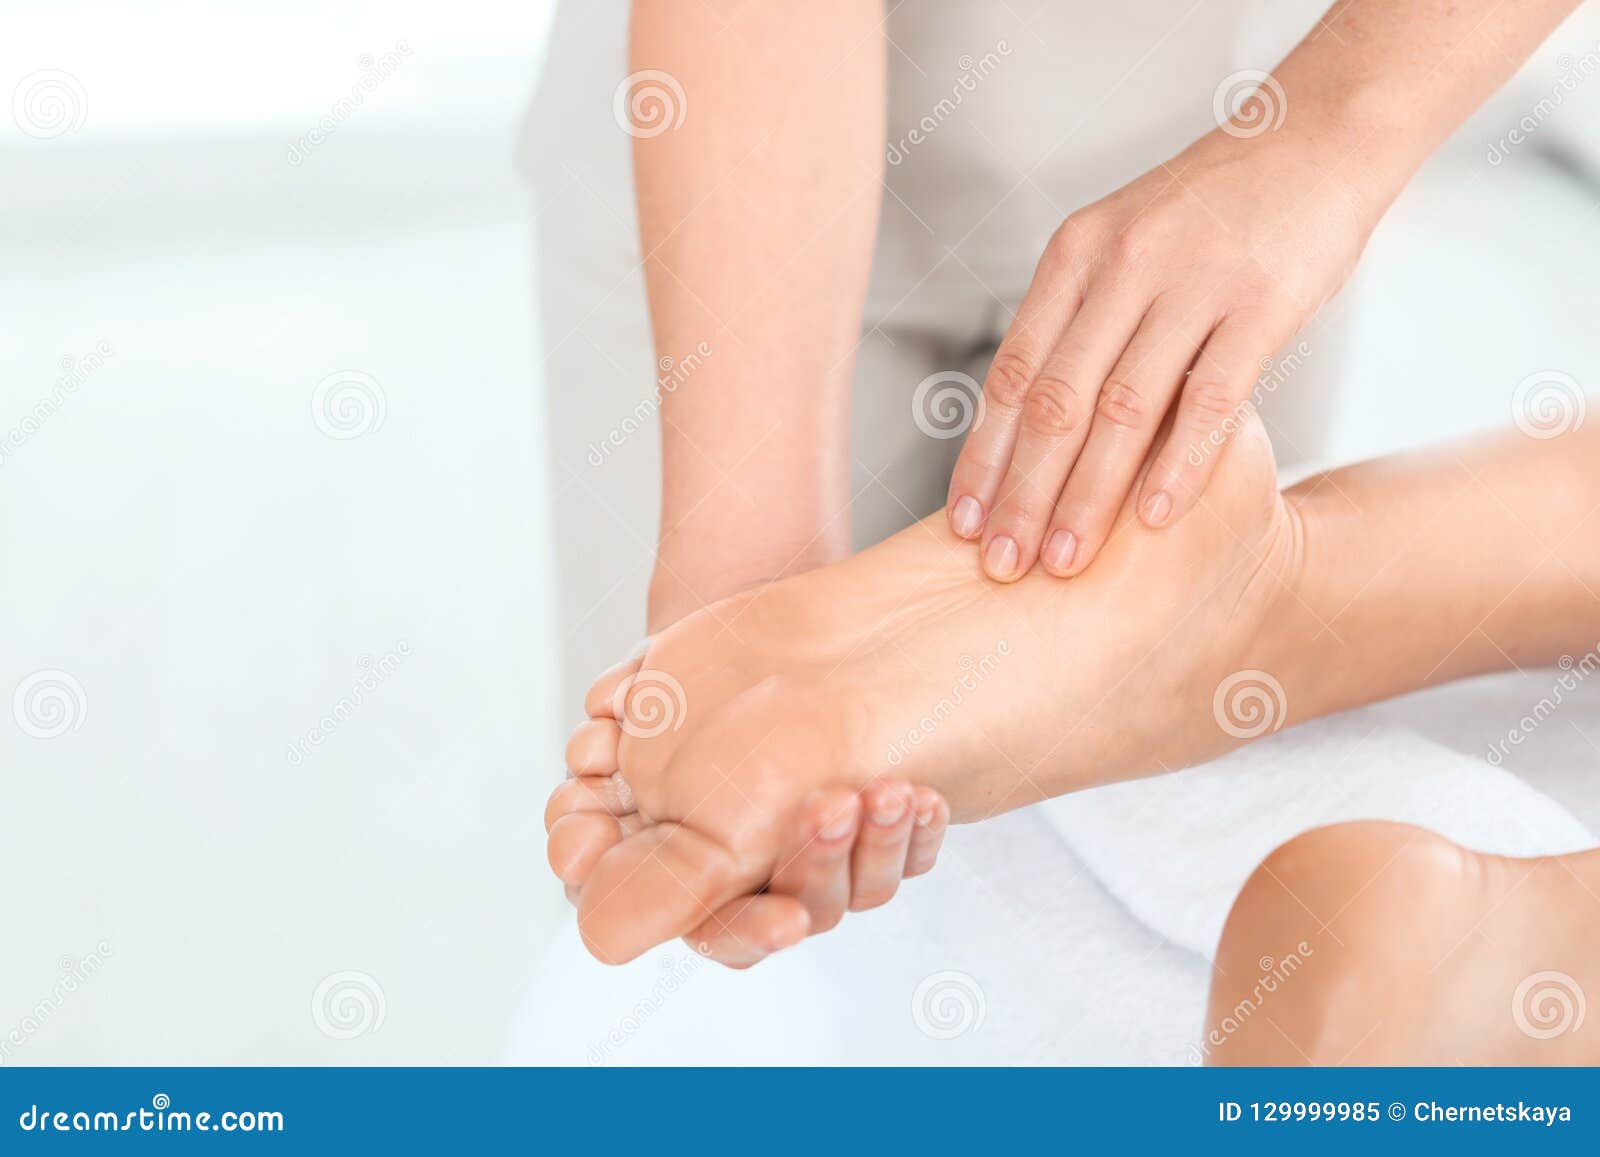 Woman Receiving Foot Massage In Wellness Center Stock Image Image Of